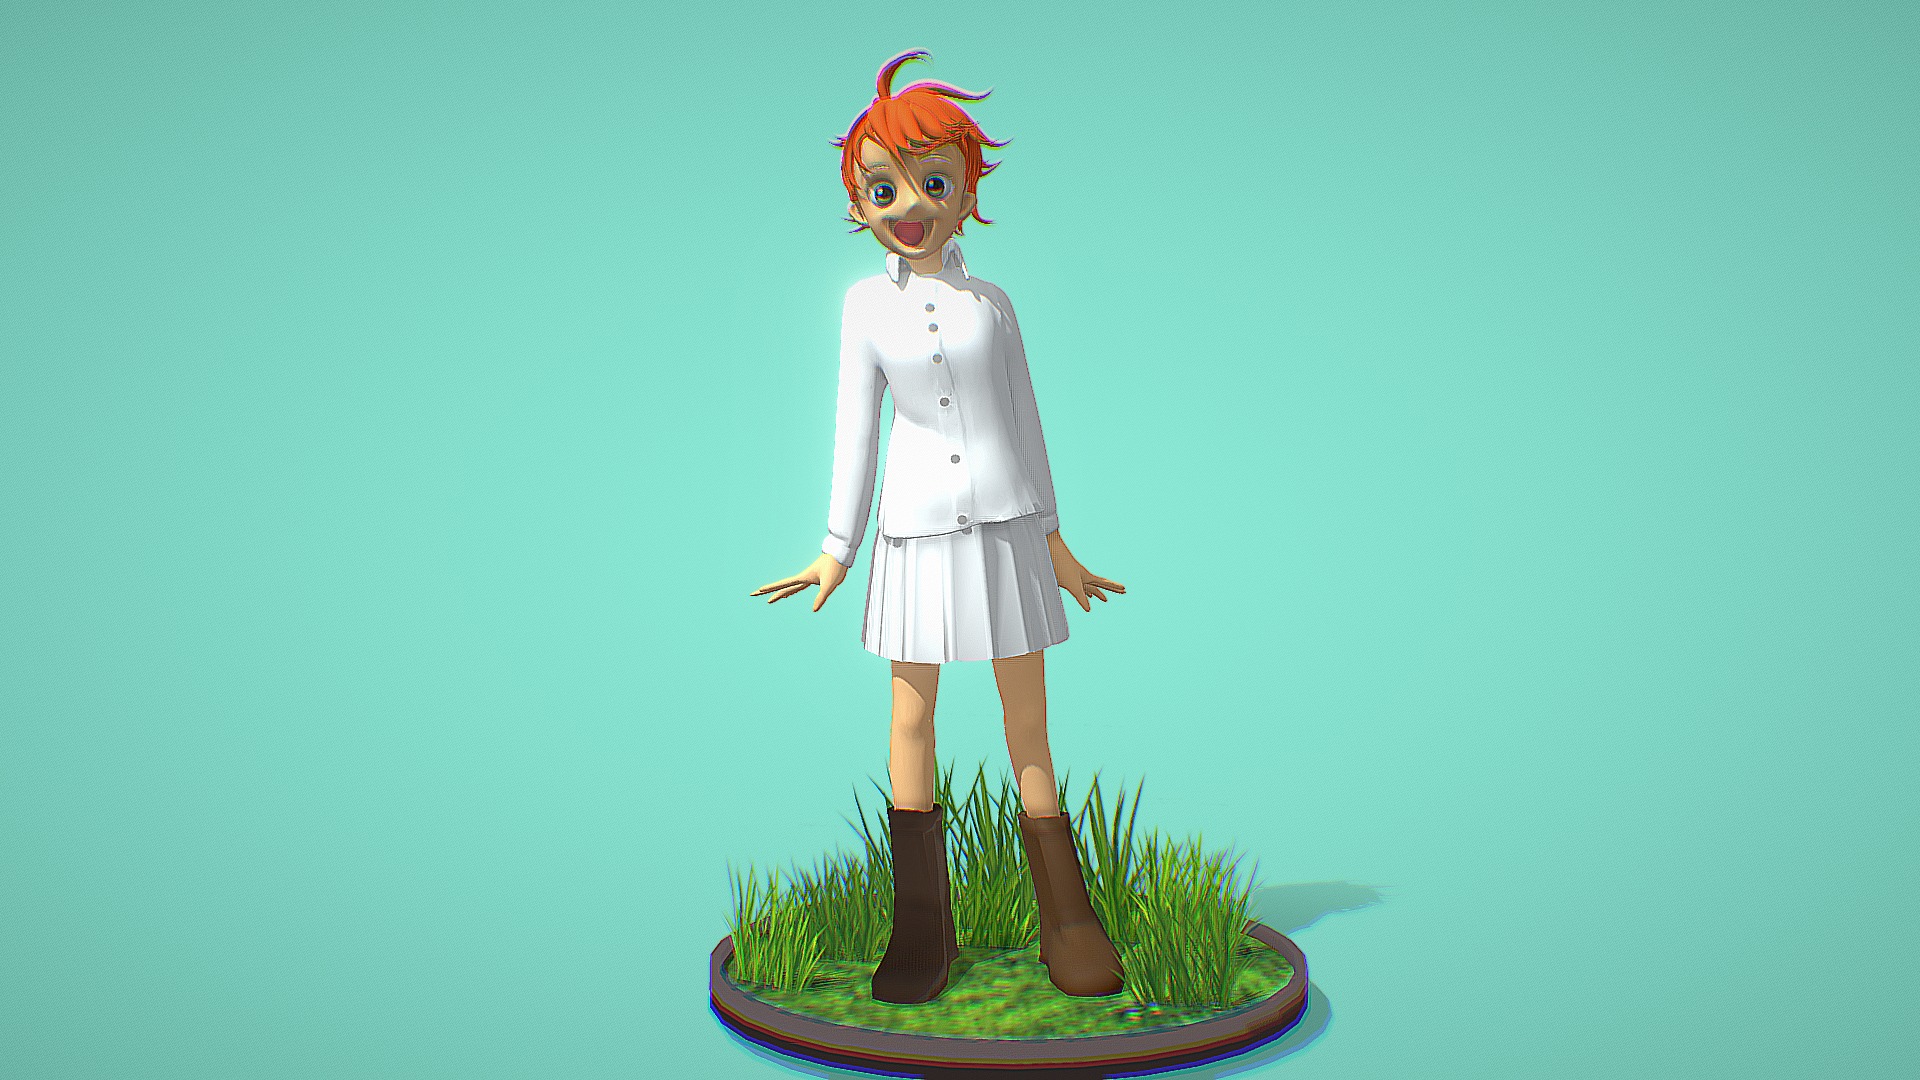 3D model Emma The Promised Neverland - This is a 3D model of the Emma The Promised Neverland. The 3D model is about a toy doll standing on a small platform.